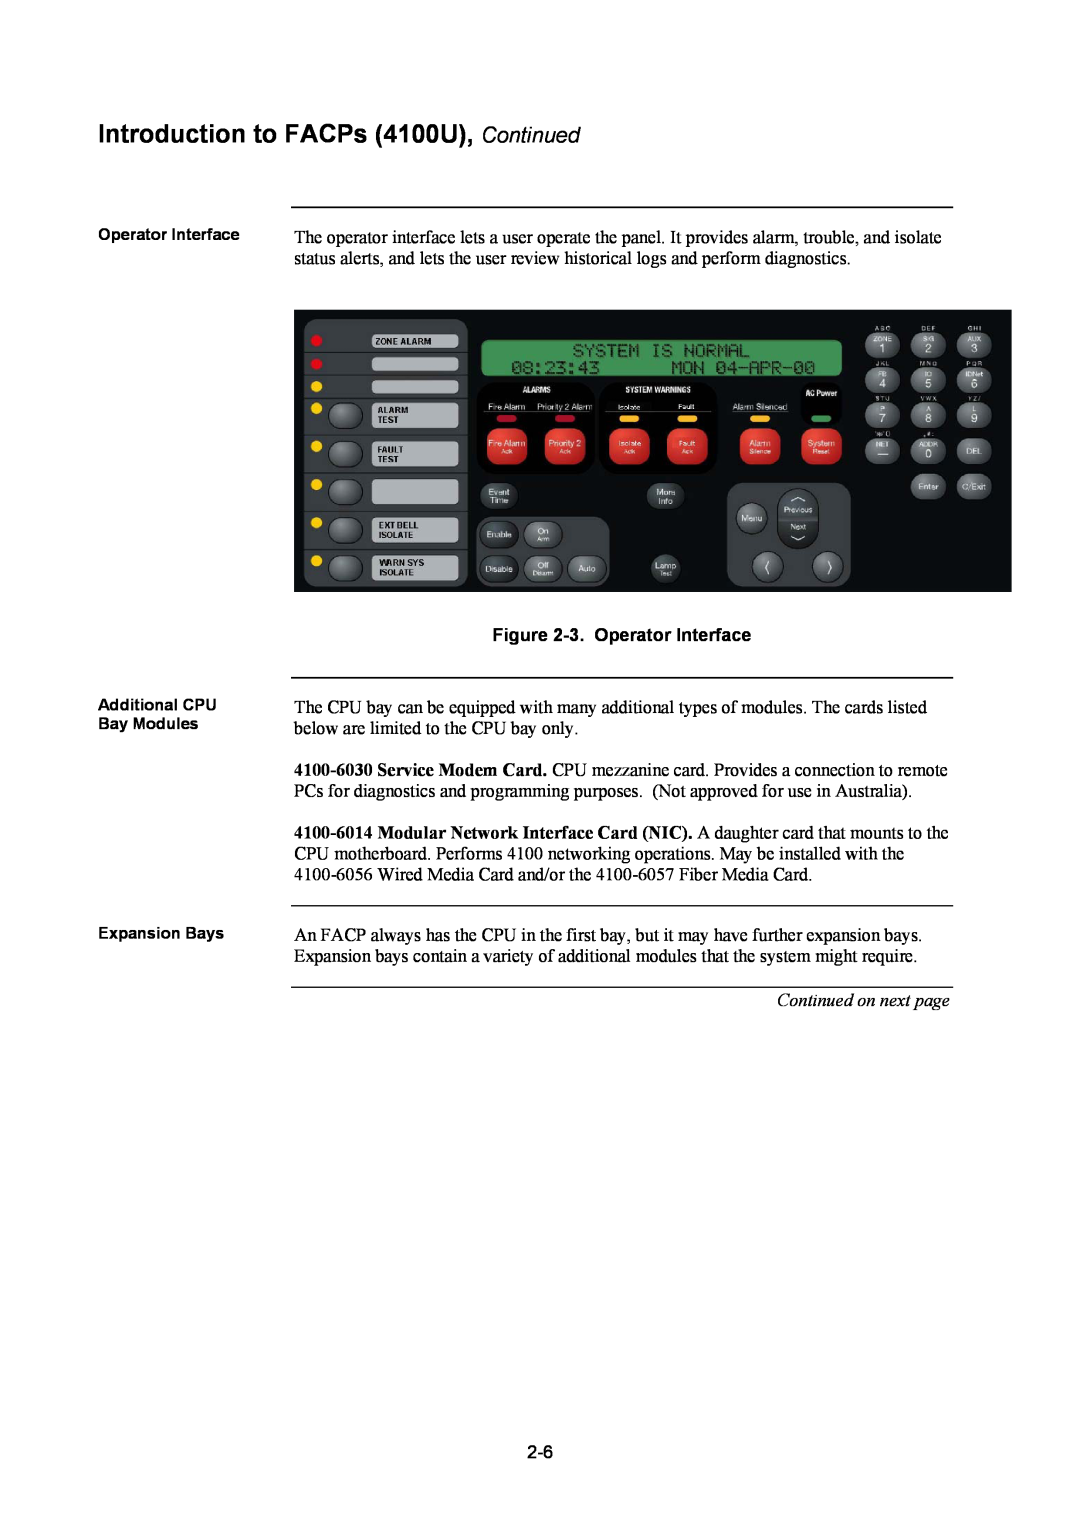 Tyco Introduction to FACPs 4100U, Continued, 3.Operator Interface, Continued on next page, Expansion Bays 